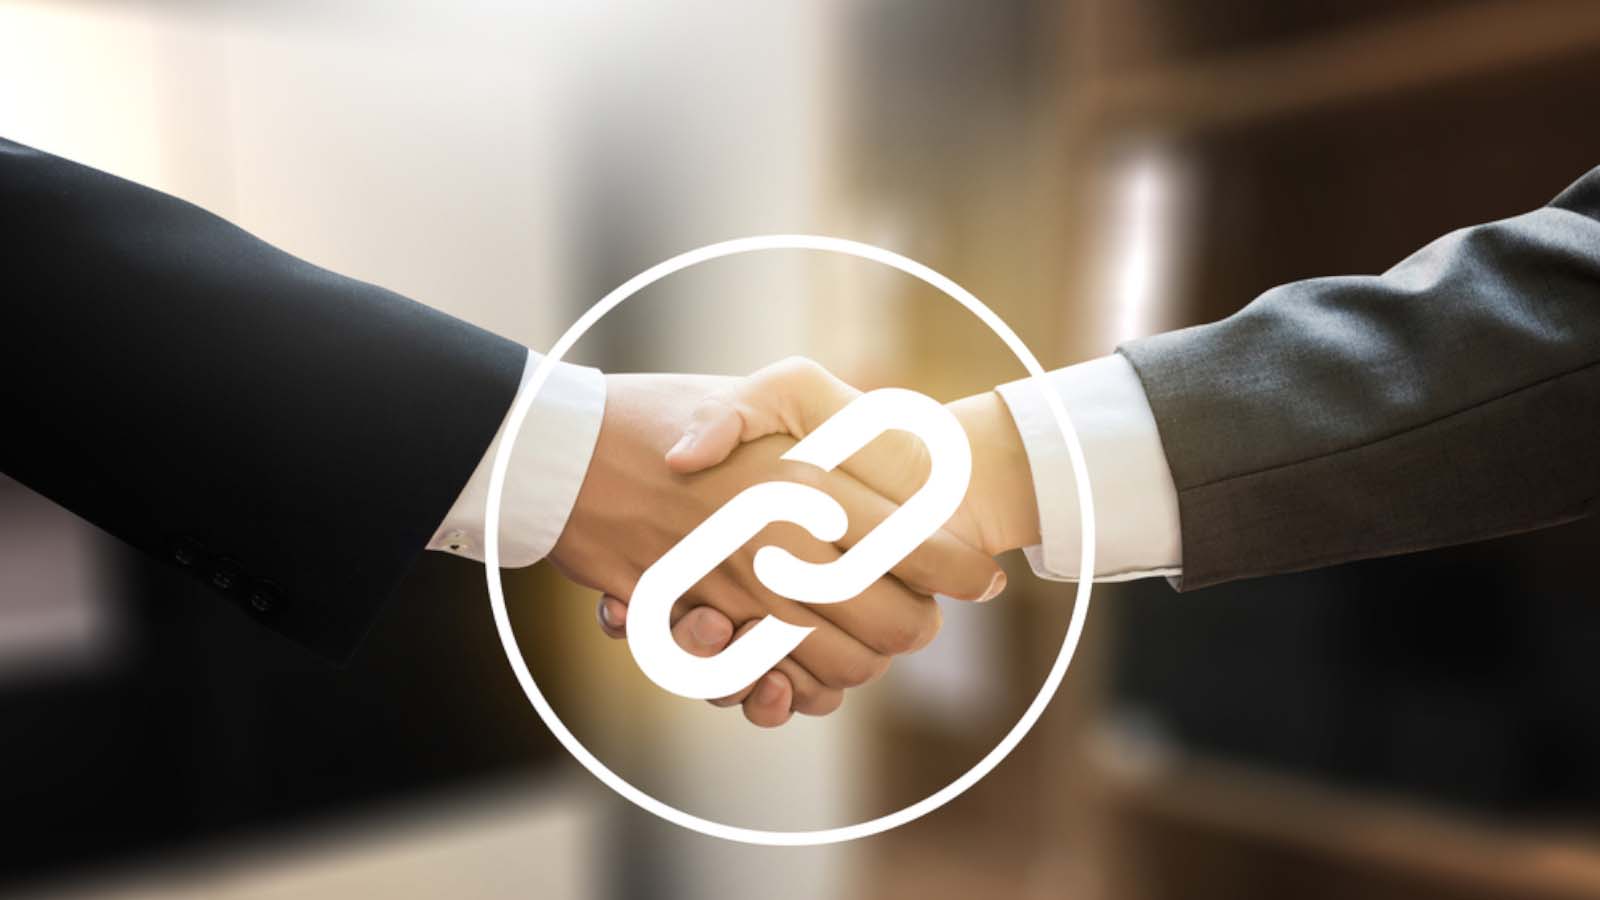 backlinks shaking hand representing how two websites could work together